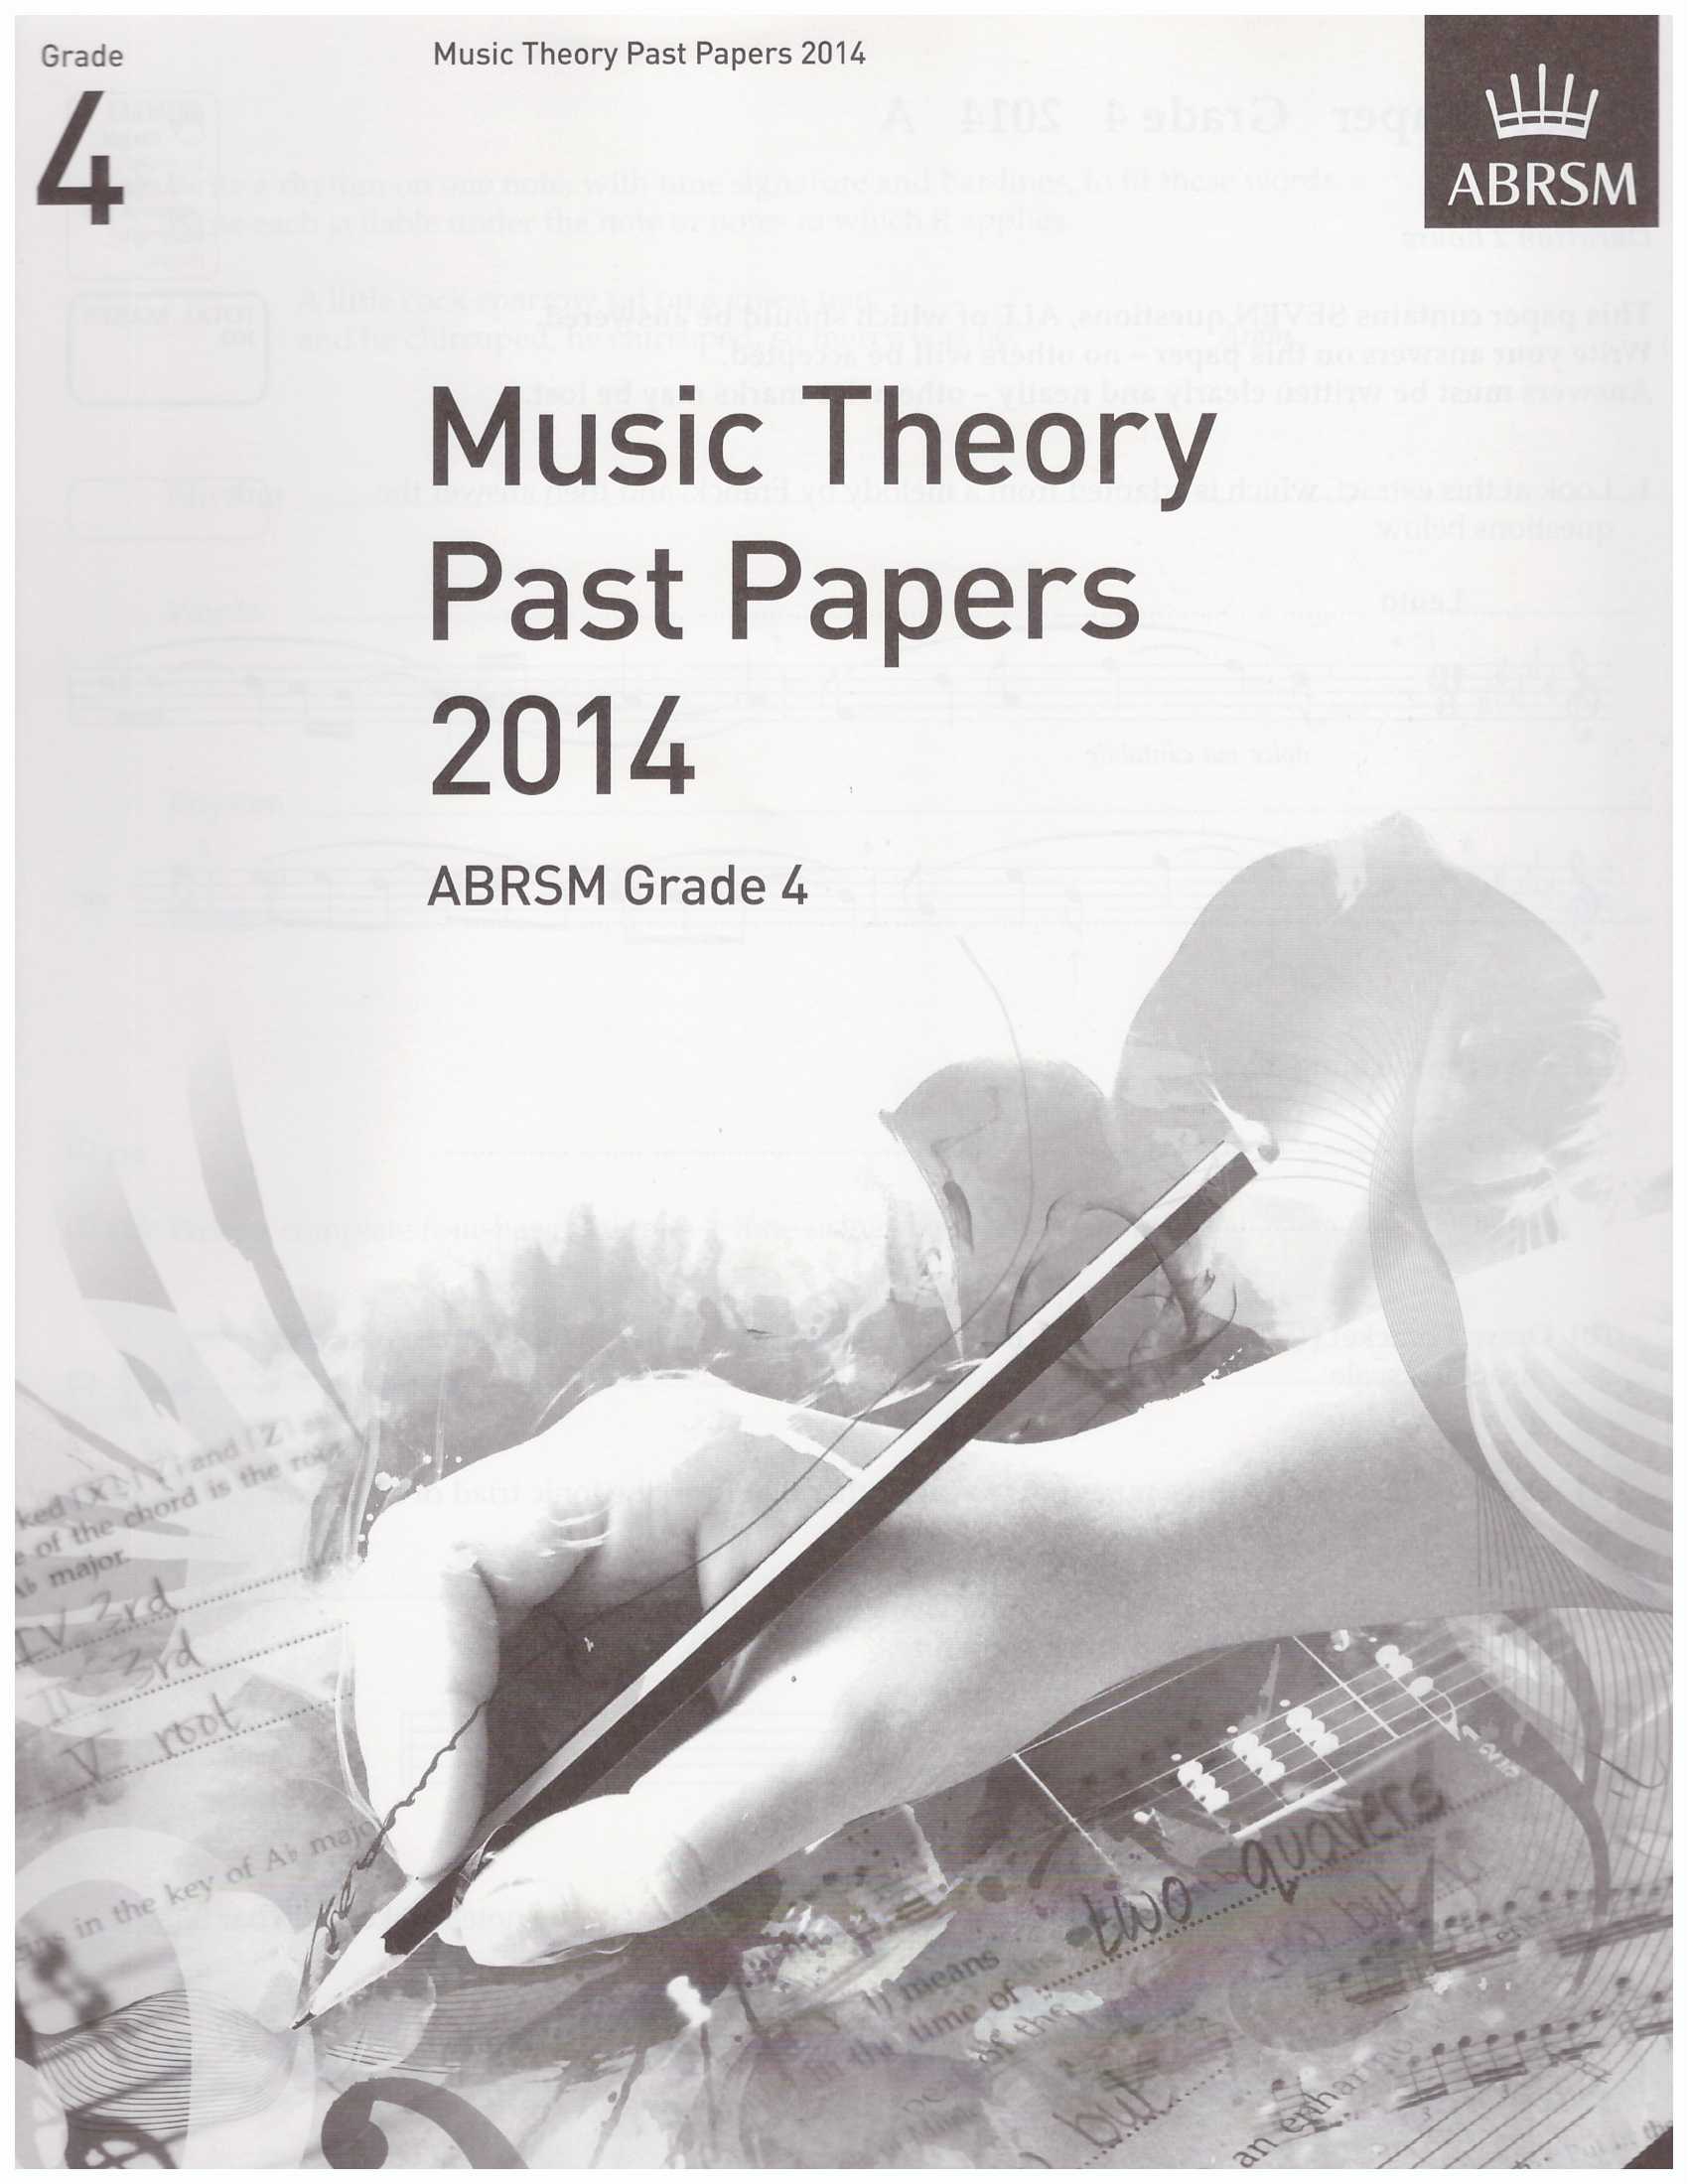 ABRSM Music Theory Practice Papers 2014 Grade 4 / Theory Paper / Theory Exam Paper / Theory Past Year Paper / Past Paper